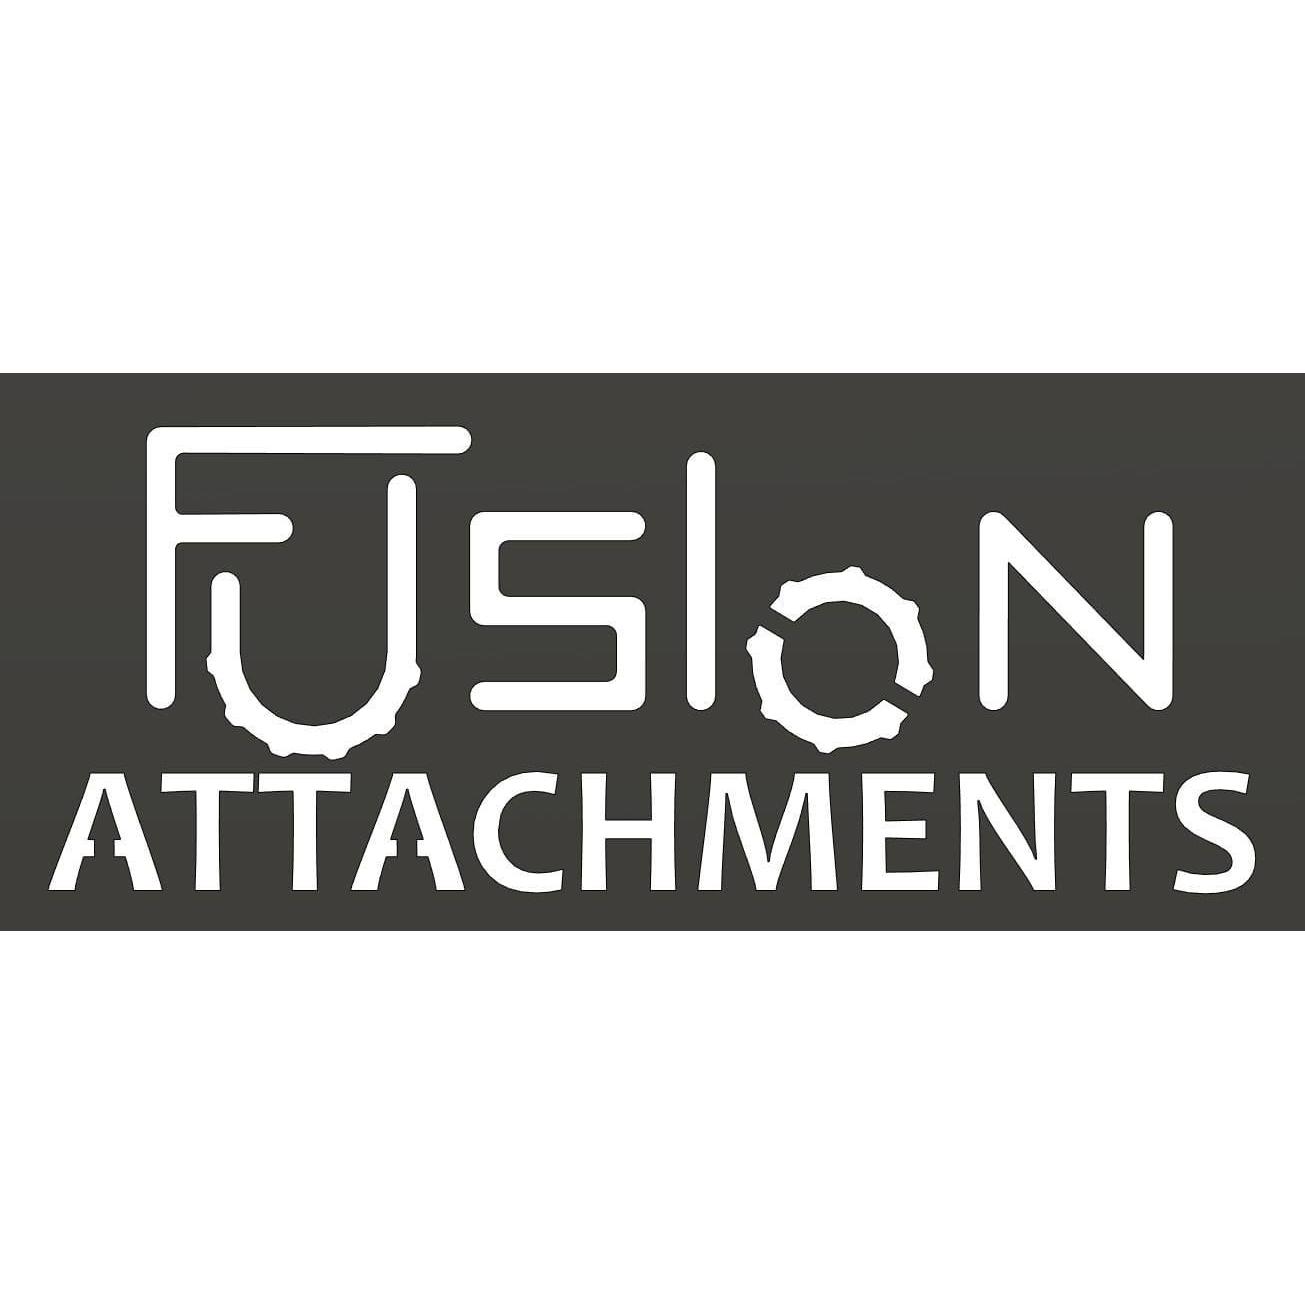 Fusion Attachments - Doncaster, South Yorkshire DN11 0PH - 07894 020276 | ShowMeLocal.com